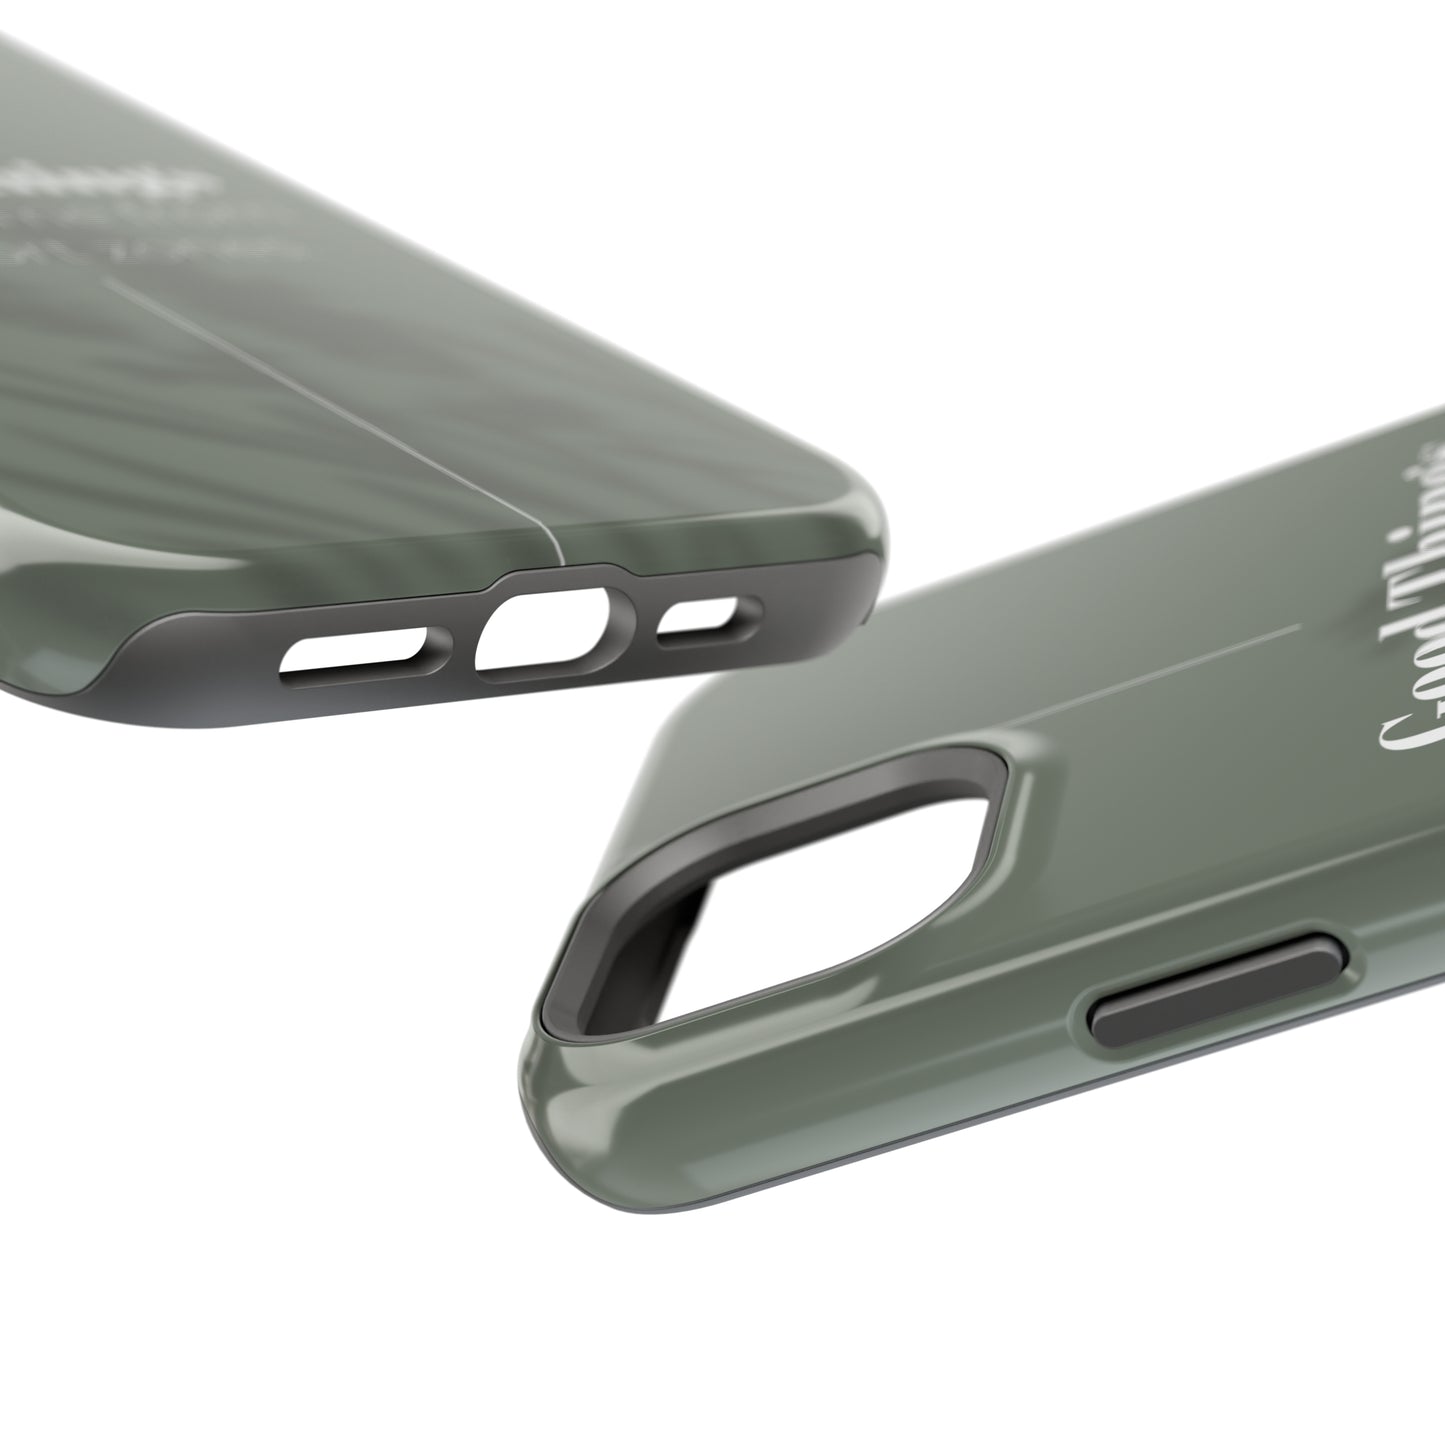 Bullish On Style Dual-Layer Impact-Resistant Cases Phone Cases: Embrace Possibilities